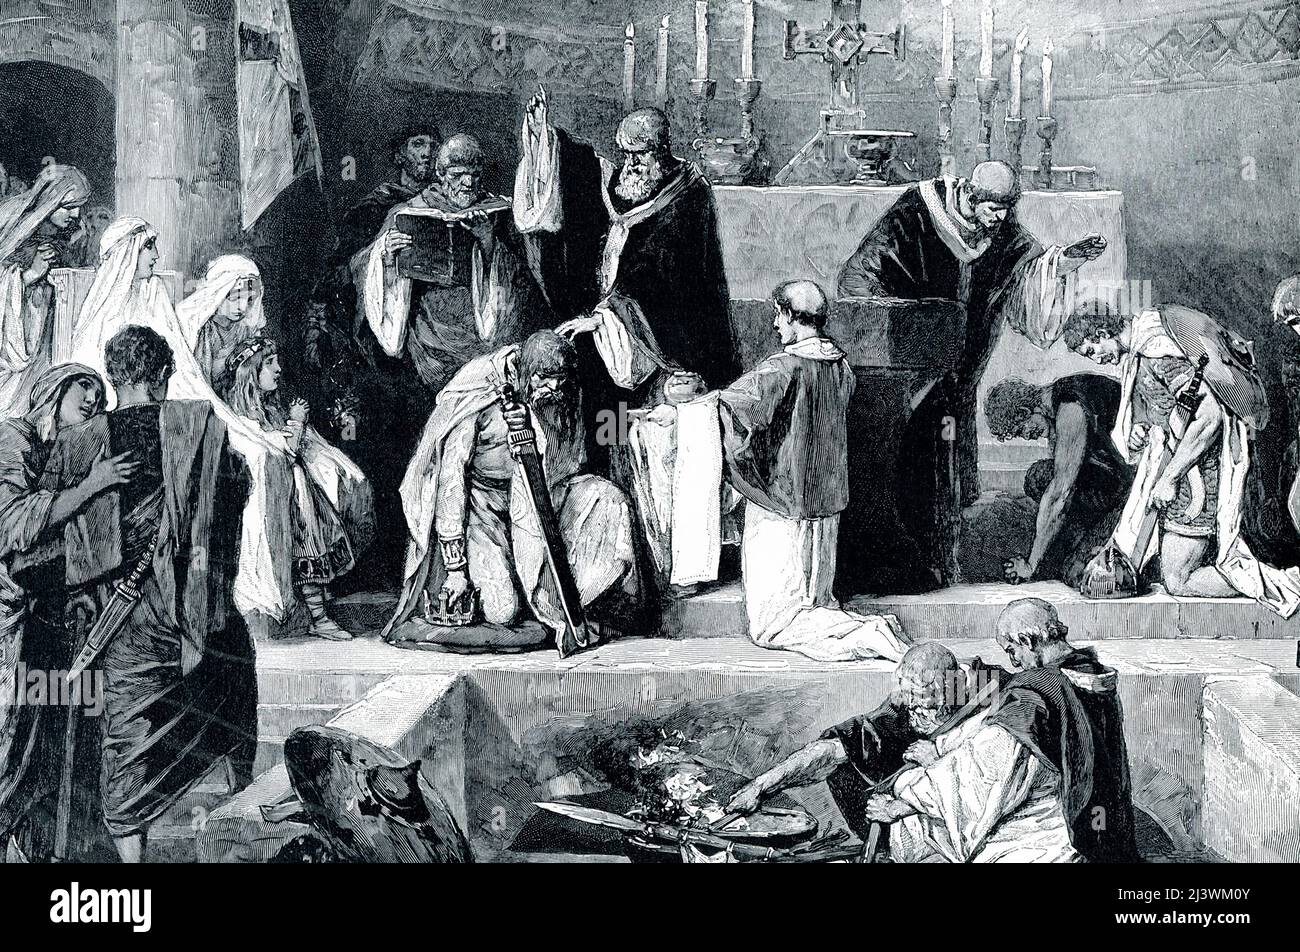 The 1906 caption reads: “Baptism of Clovis.—Clovis, a chieftain of the heathen Franks, conquered the Roman land of Gaul and named it France. He married a Christian wife [Clotilde], and was finally persuaded by her to adopt her faith and submit to baptism. We see the ceremony as it was performed in the ancient cathedral at Rheims by Bishop Remigius. The barbaric warriors of Clovis gather round in amaze[ment]; the shaggy chief himself kneels half unwillingly, while above him towers the Christian bishop, summoning him to a new life.” Stock Photo